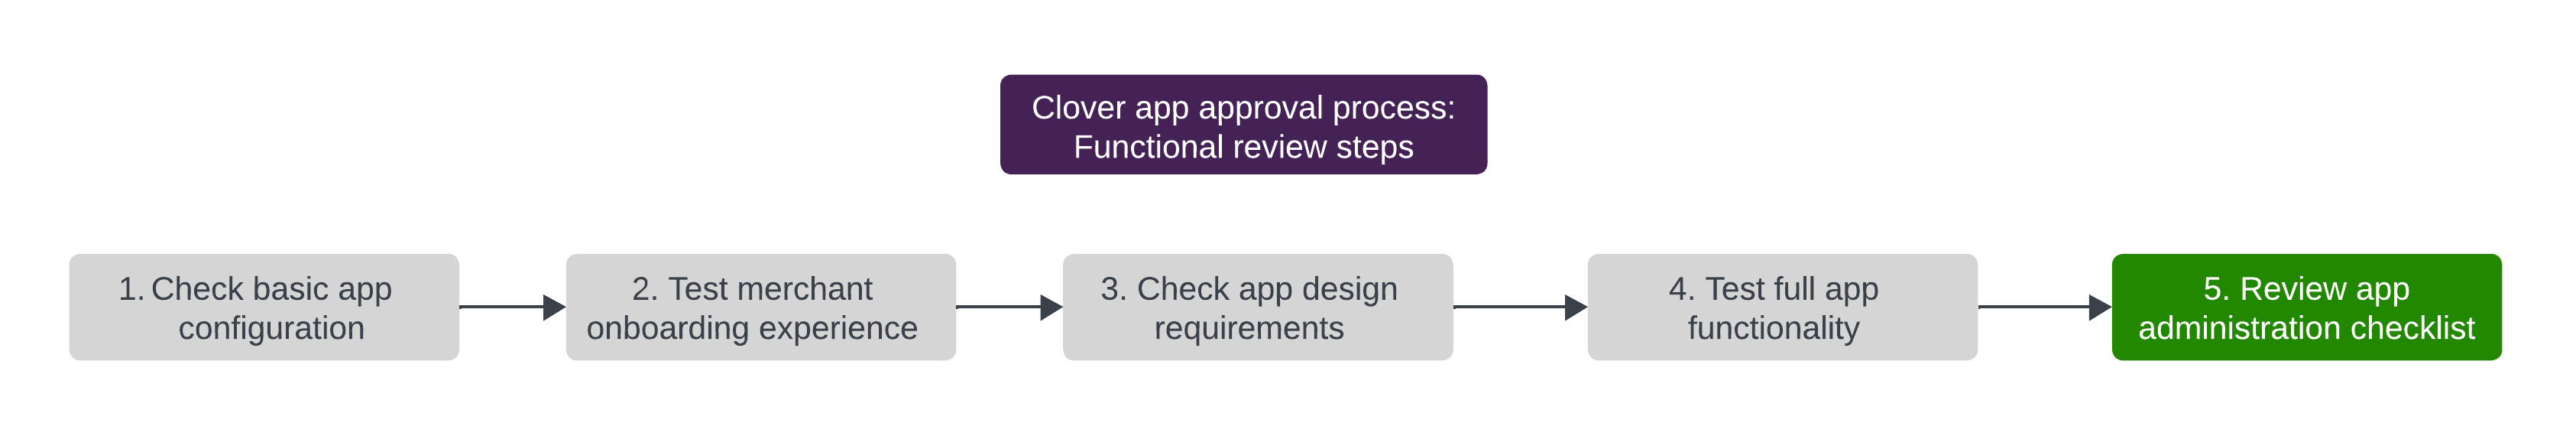 Functional review: App administration checklist